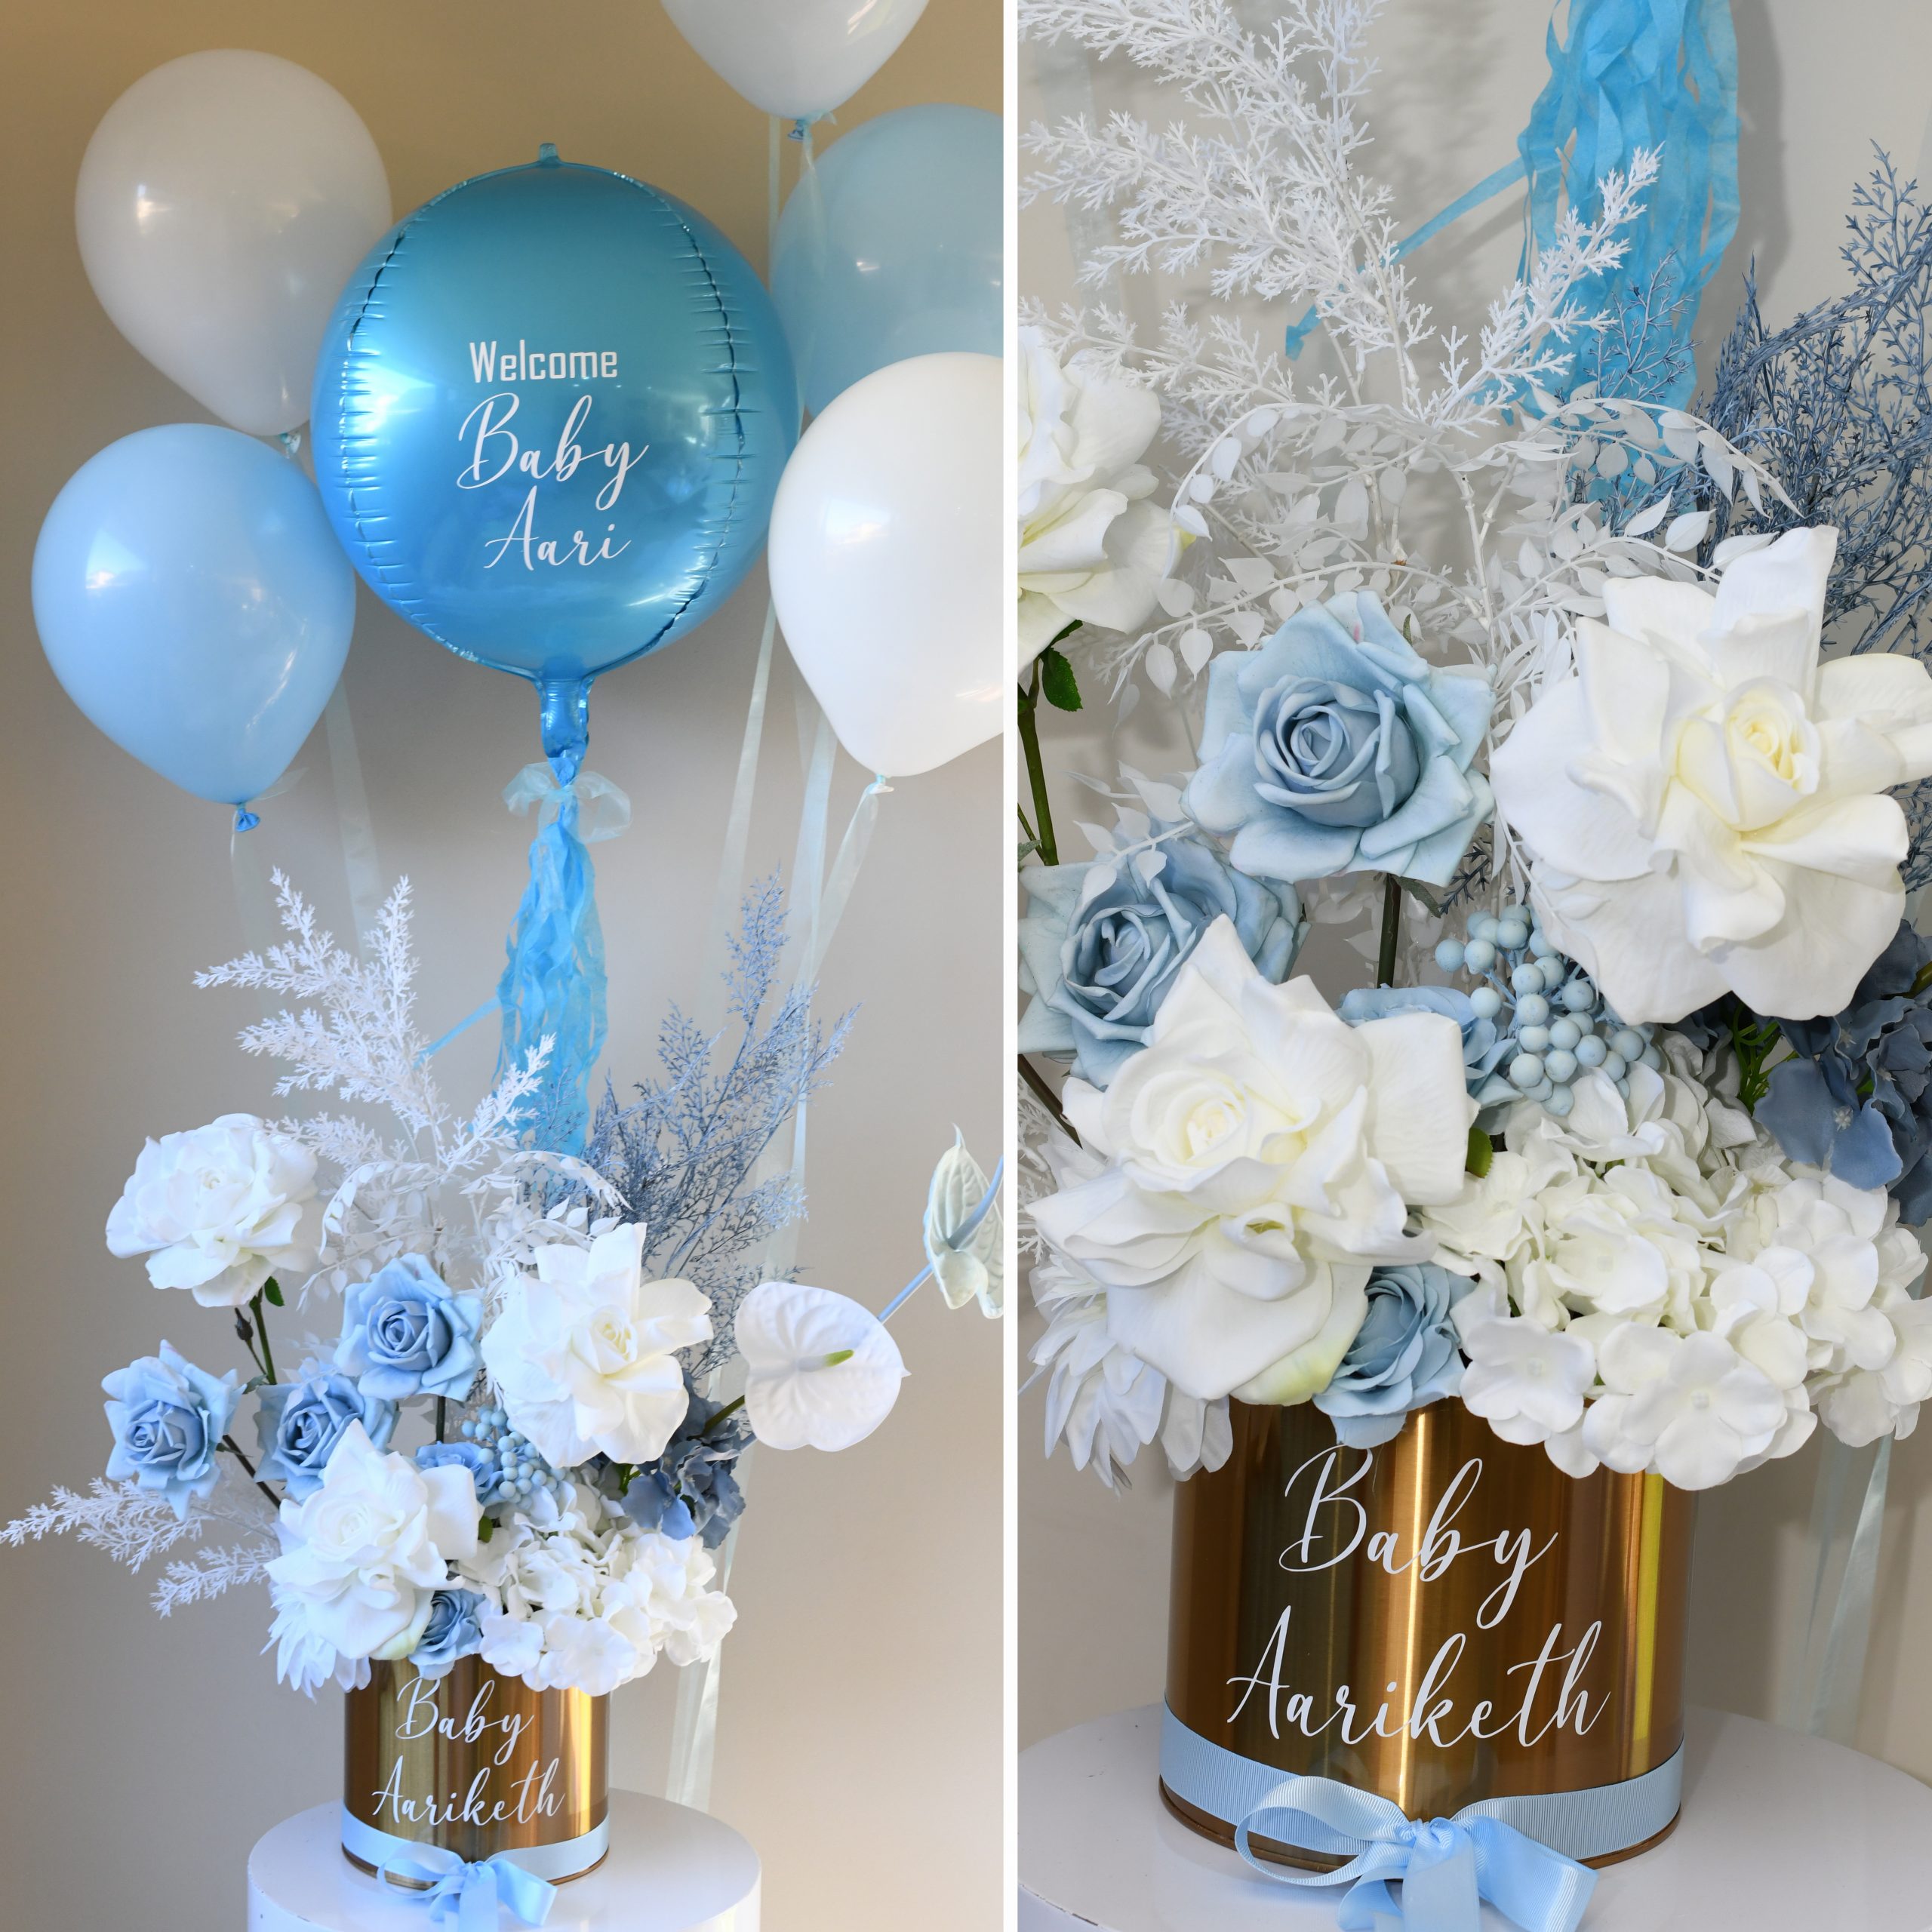 Blue Flowers, Gifts & Balloons Sydney Delivery - WOWGIFTS 04